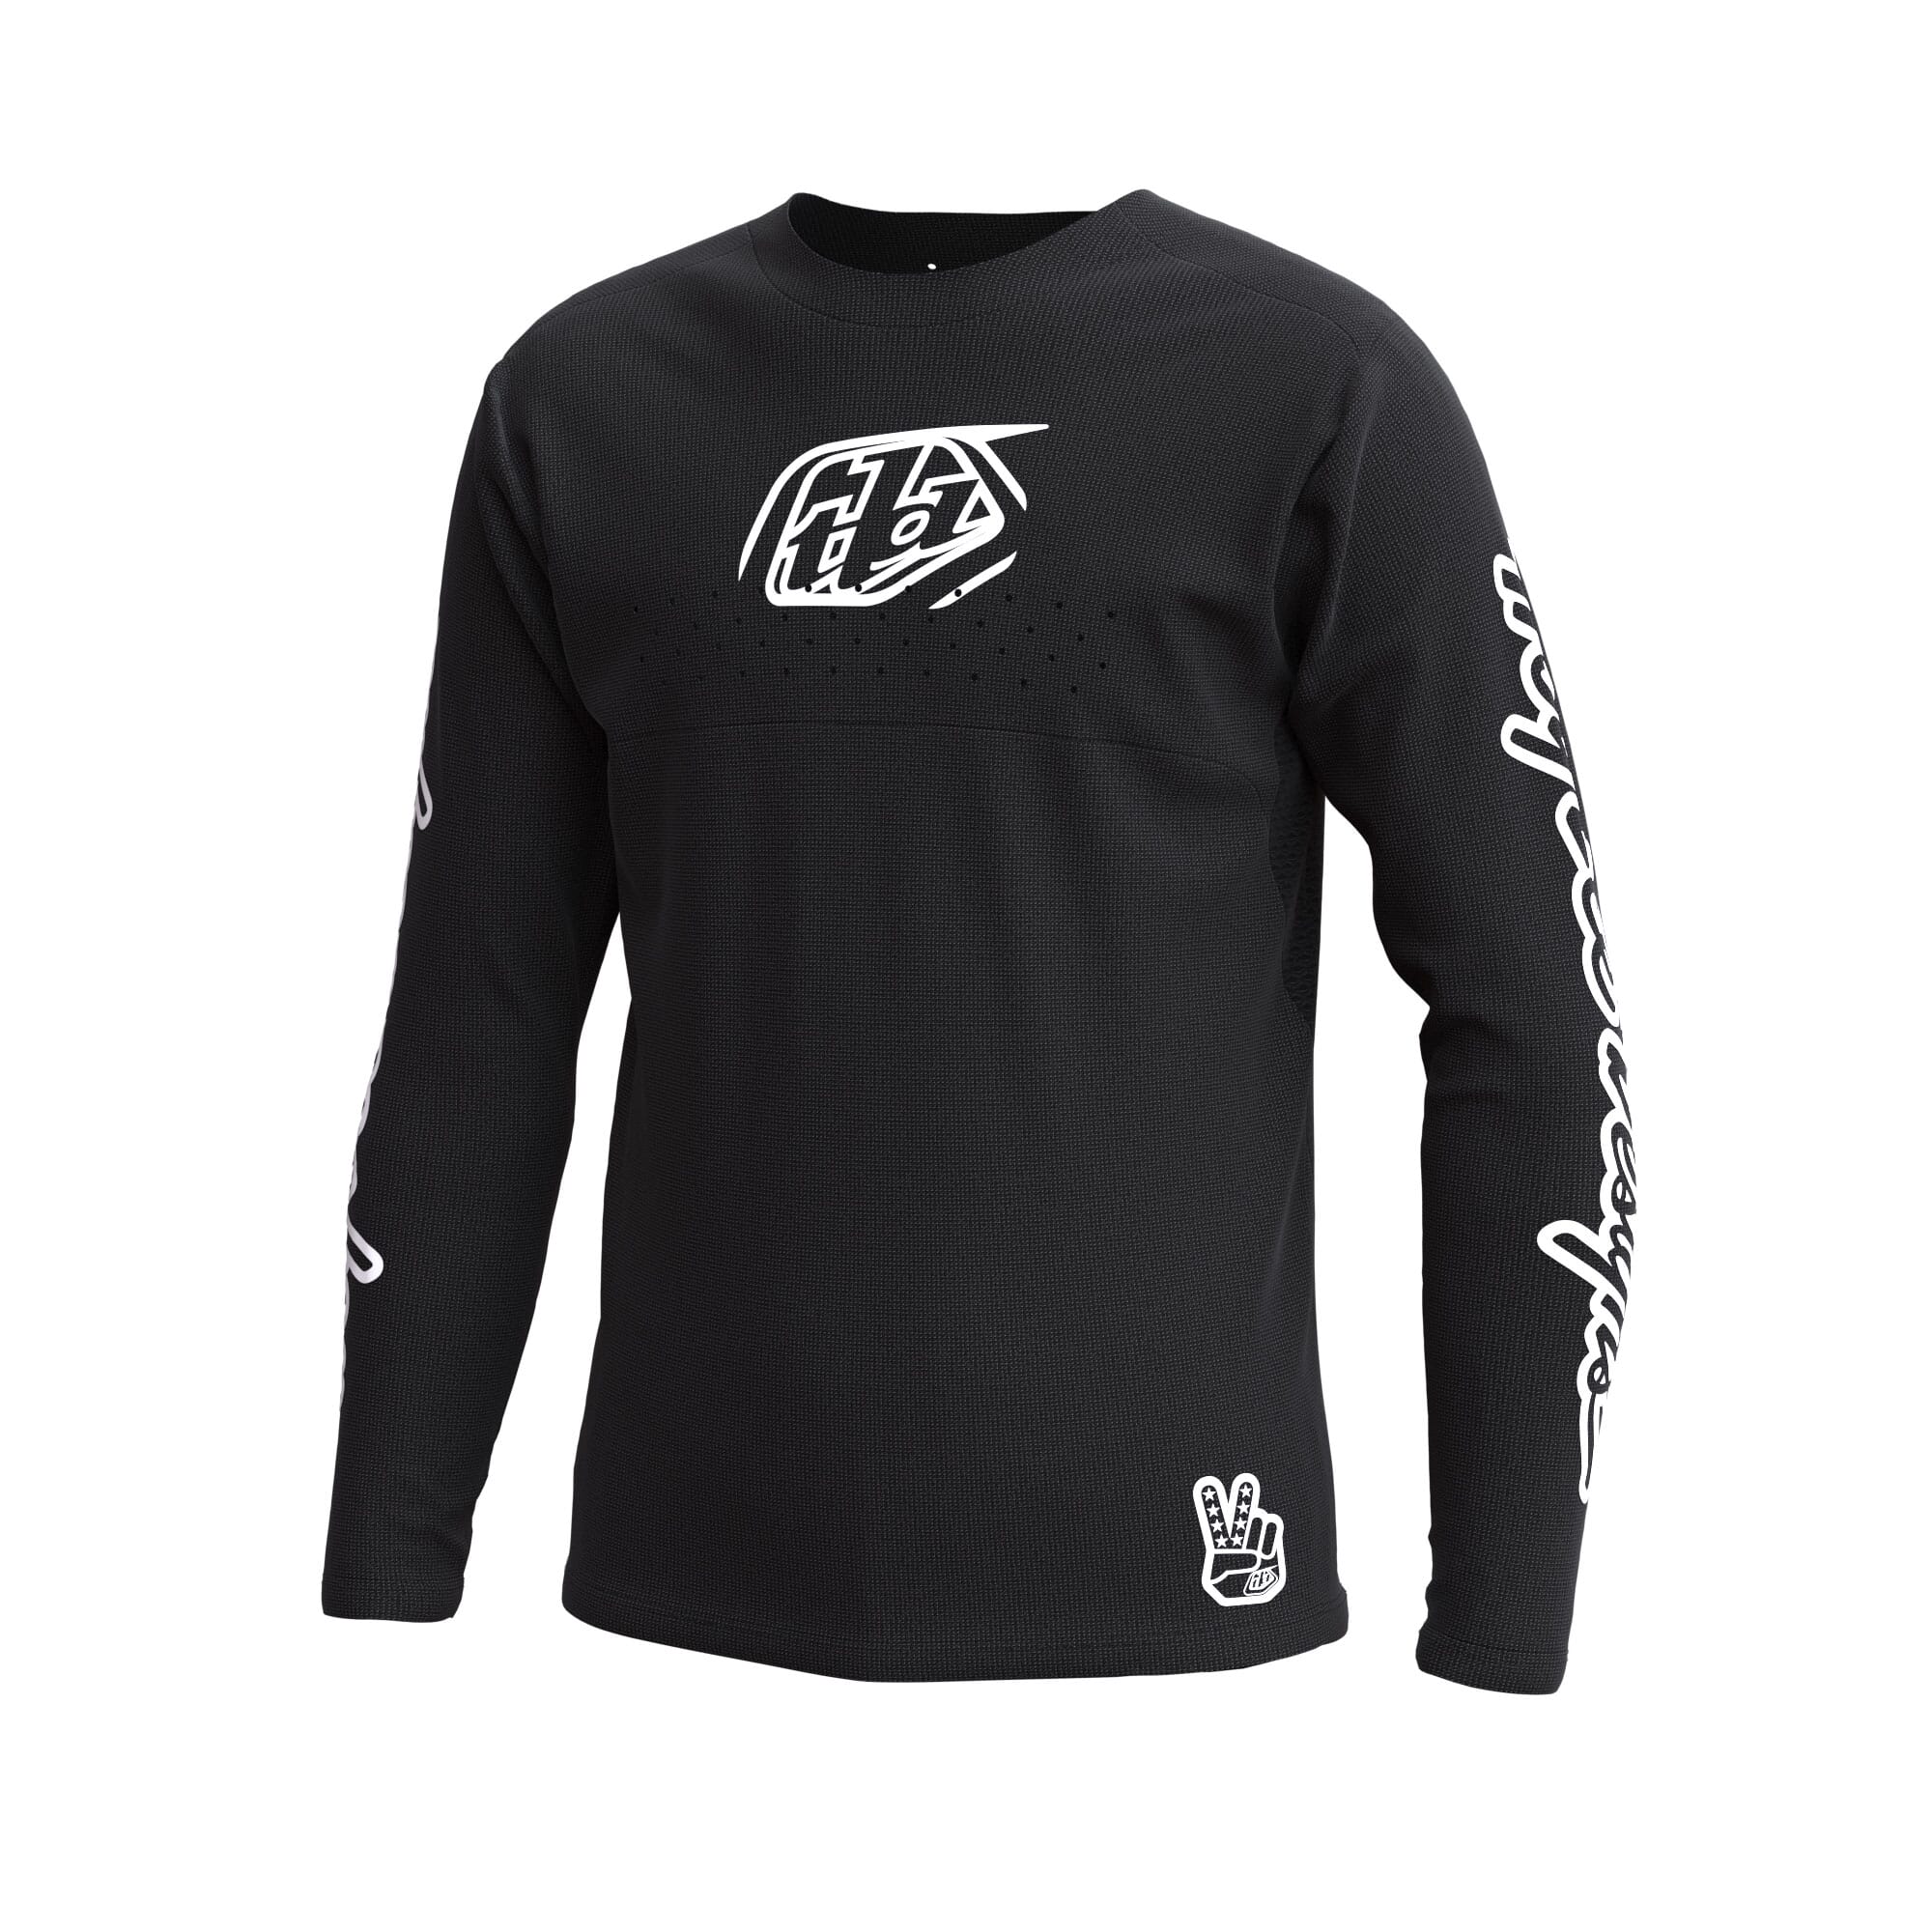 Troy Lee Designs Sprint Youth Jersey